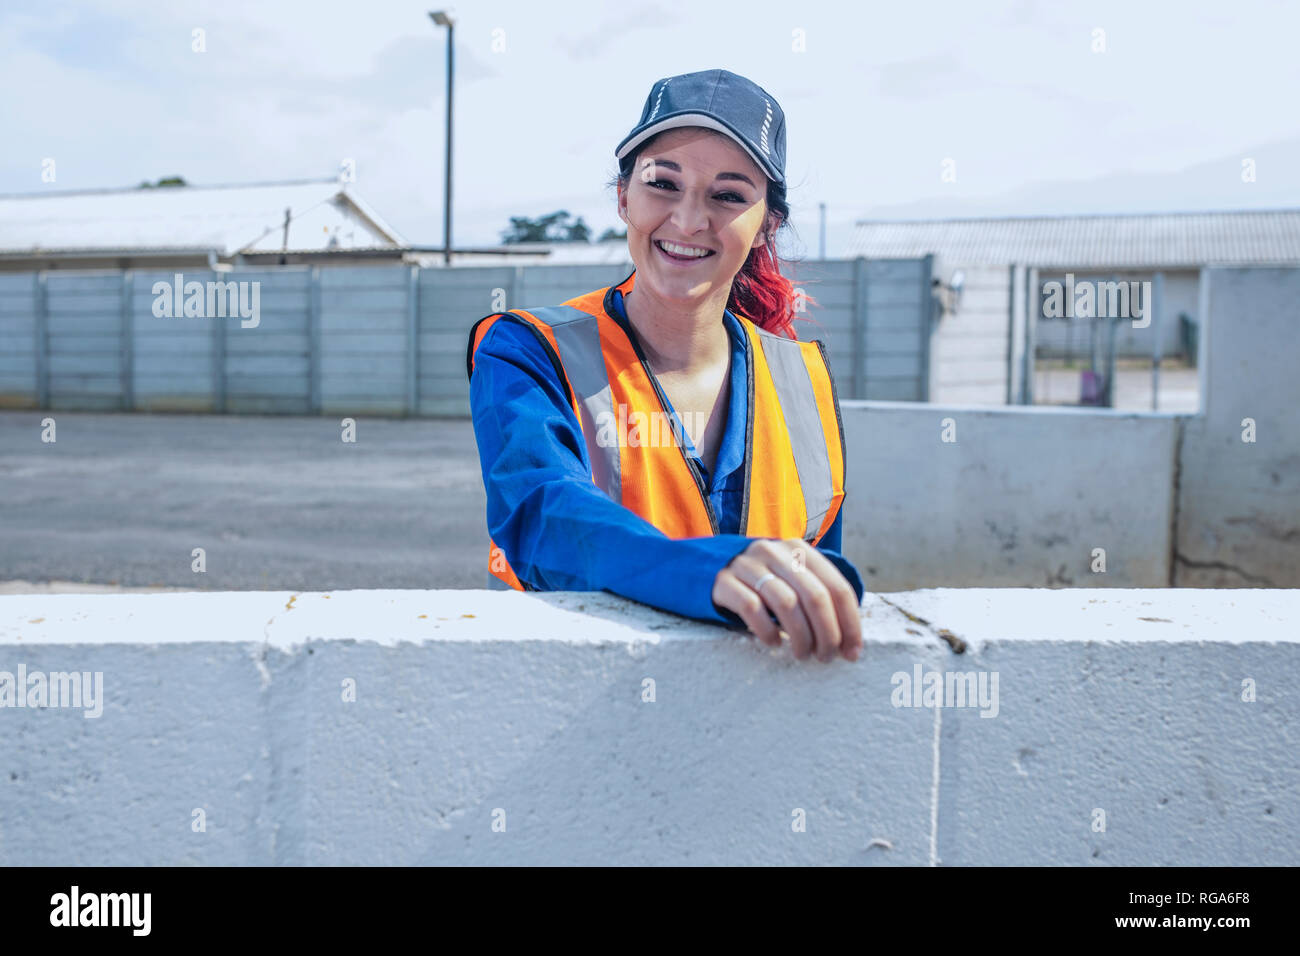 Portrait of smiling young woman wearing overalls and reflective jacket Stock Photo